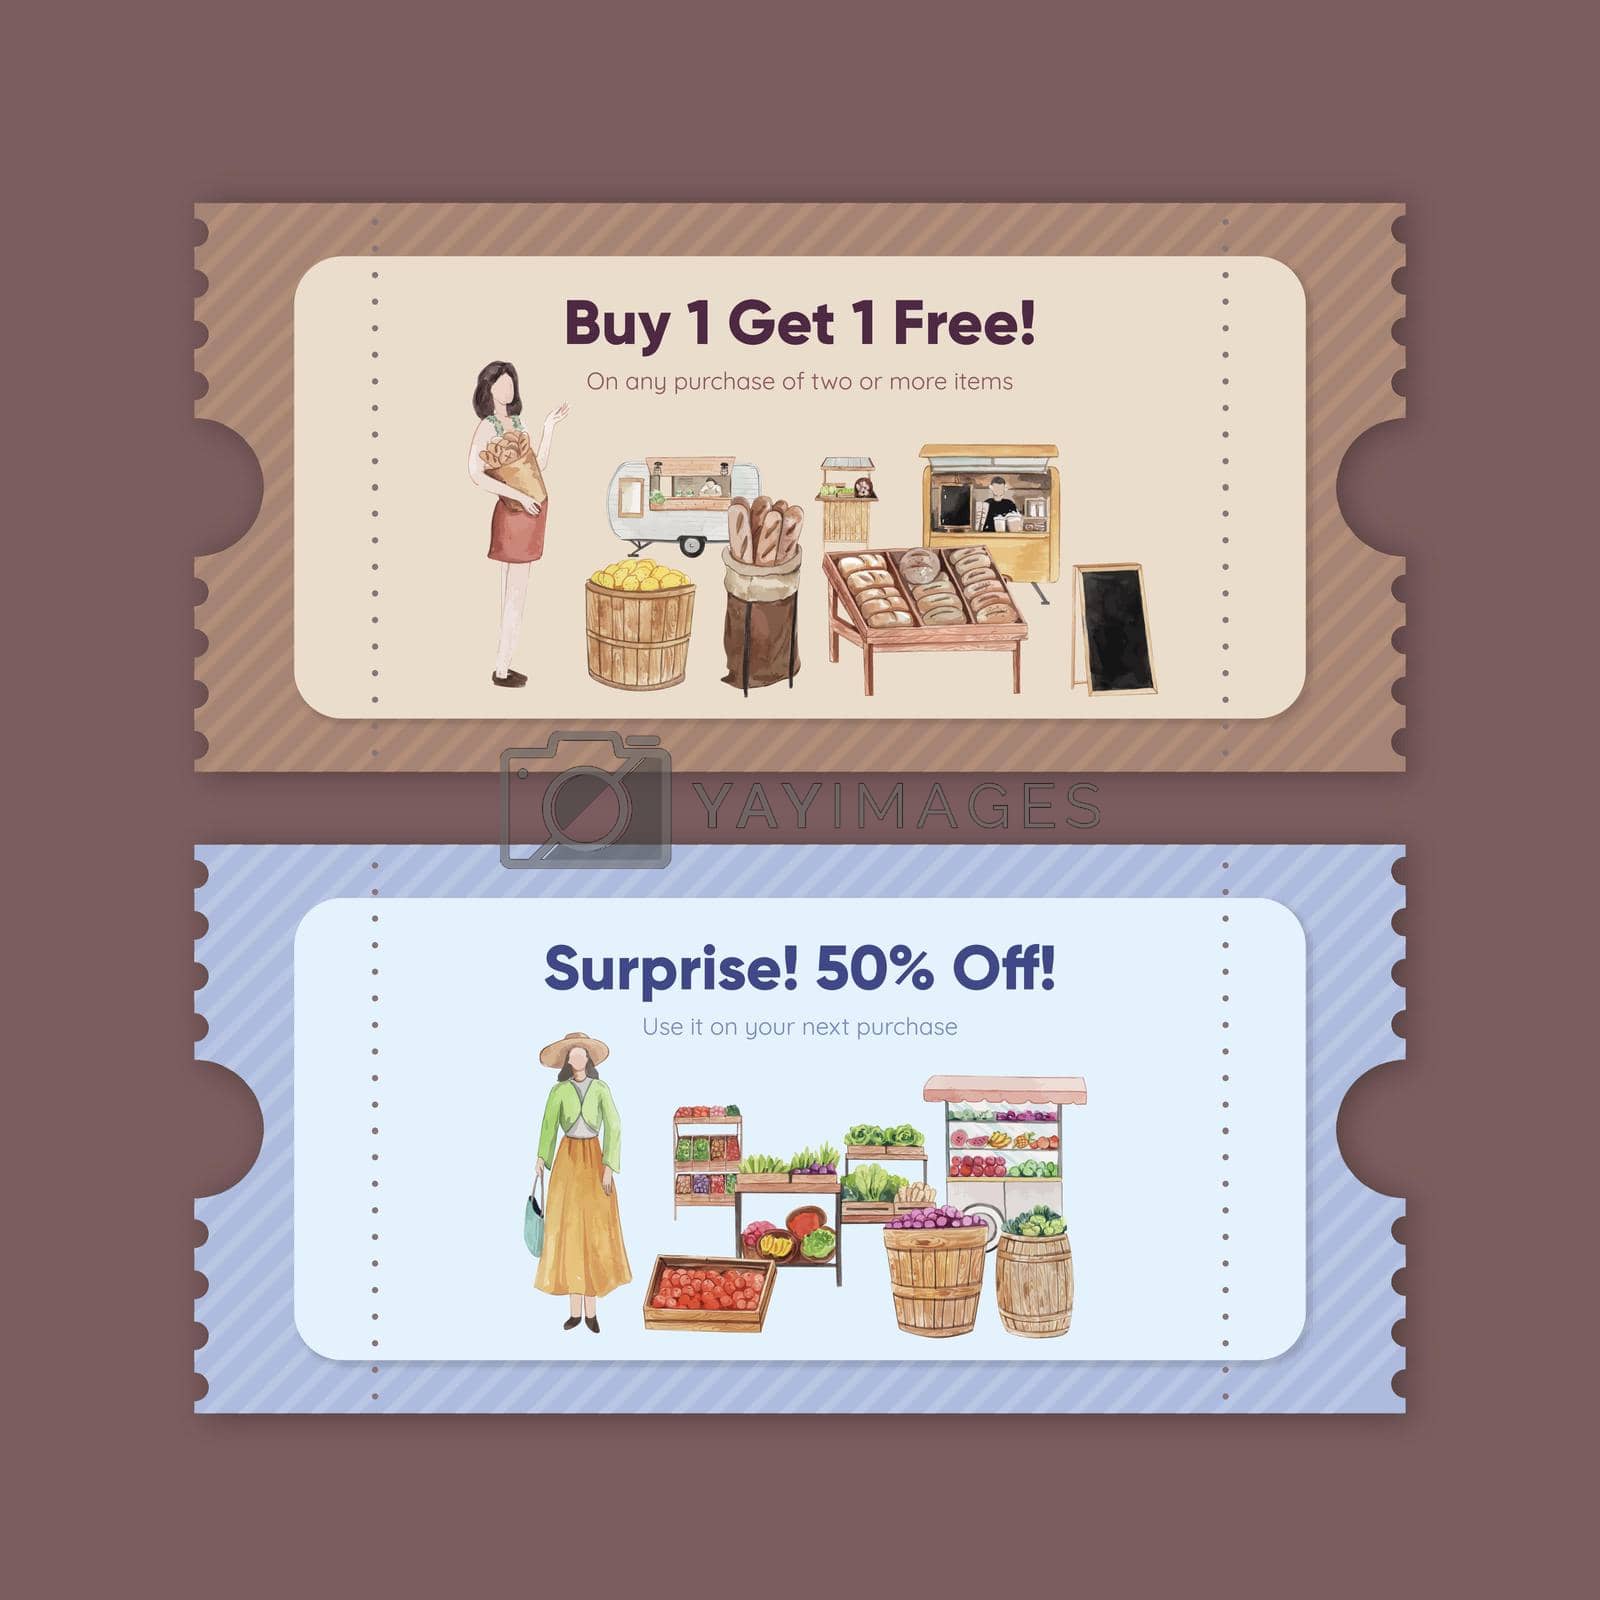 Royalty free image of Voucher template with weekend market concept,watercolor style by Photographeeasia